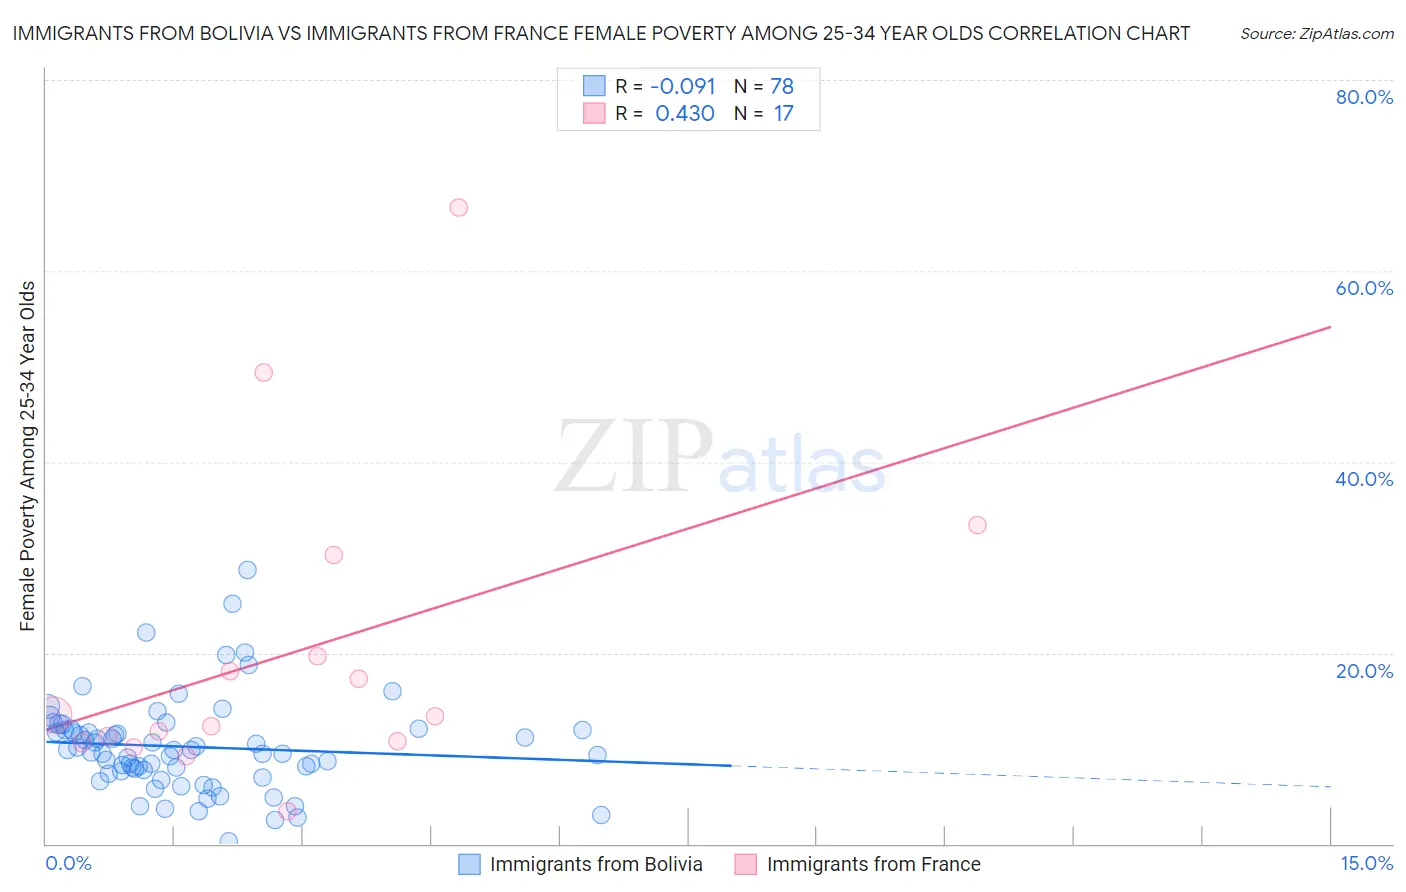 Immigrants from Bolivia vs Immigrants from France Female Poverty Among 25-34 Year Olds